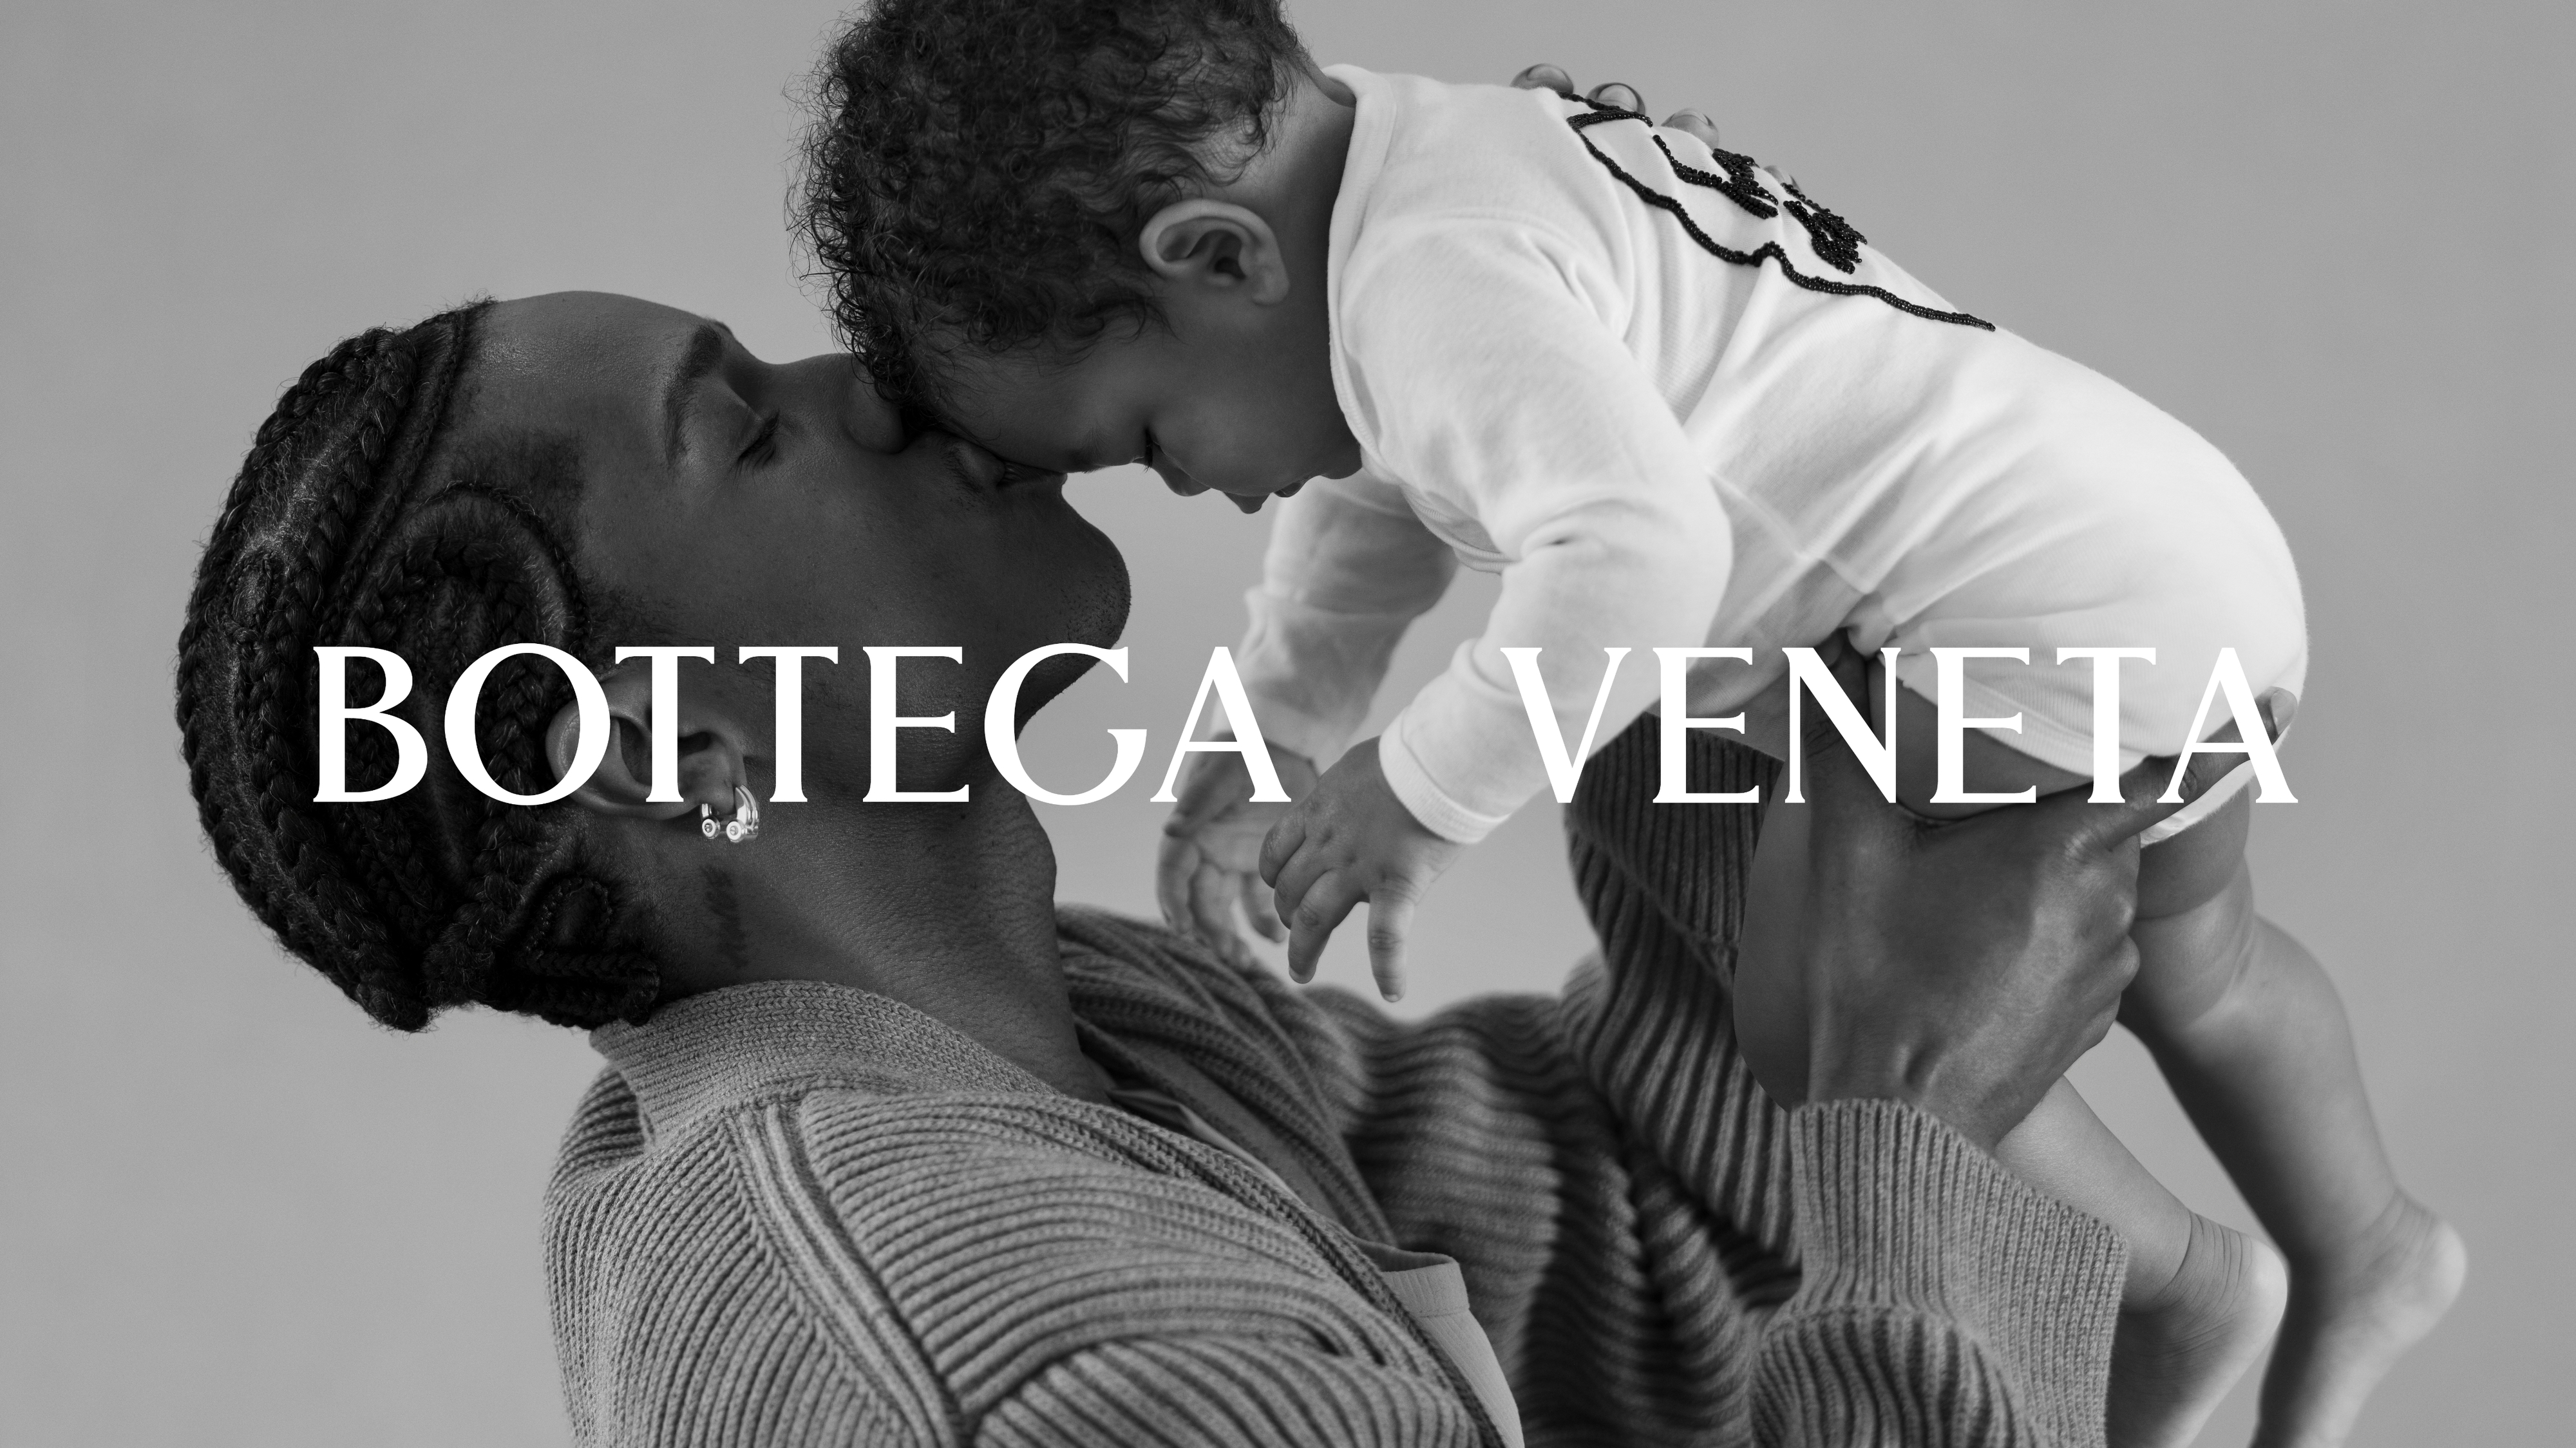 Pusha T embraces his son, who is wearing a white onesie, in a tender moment for a Bottega Veneta campaign